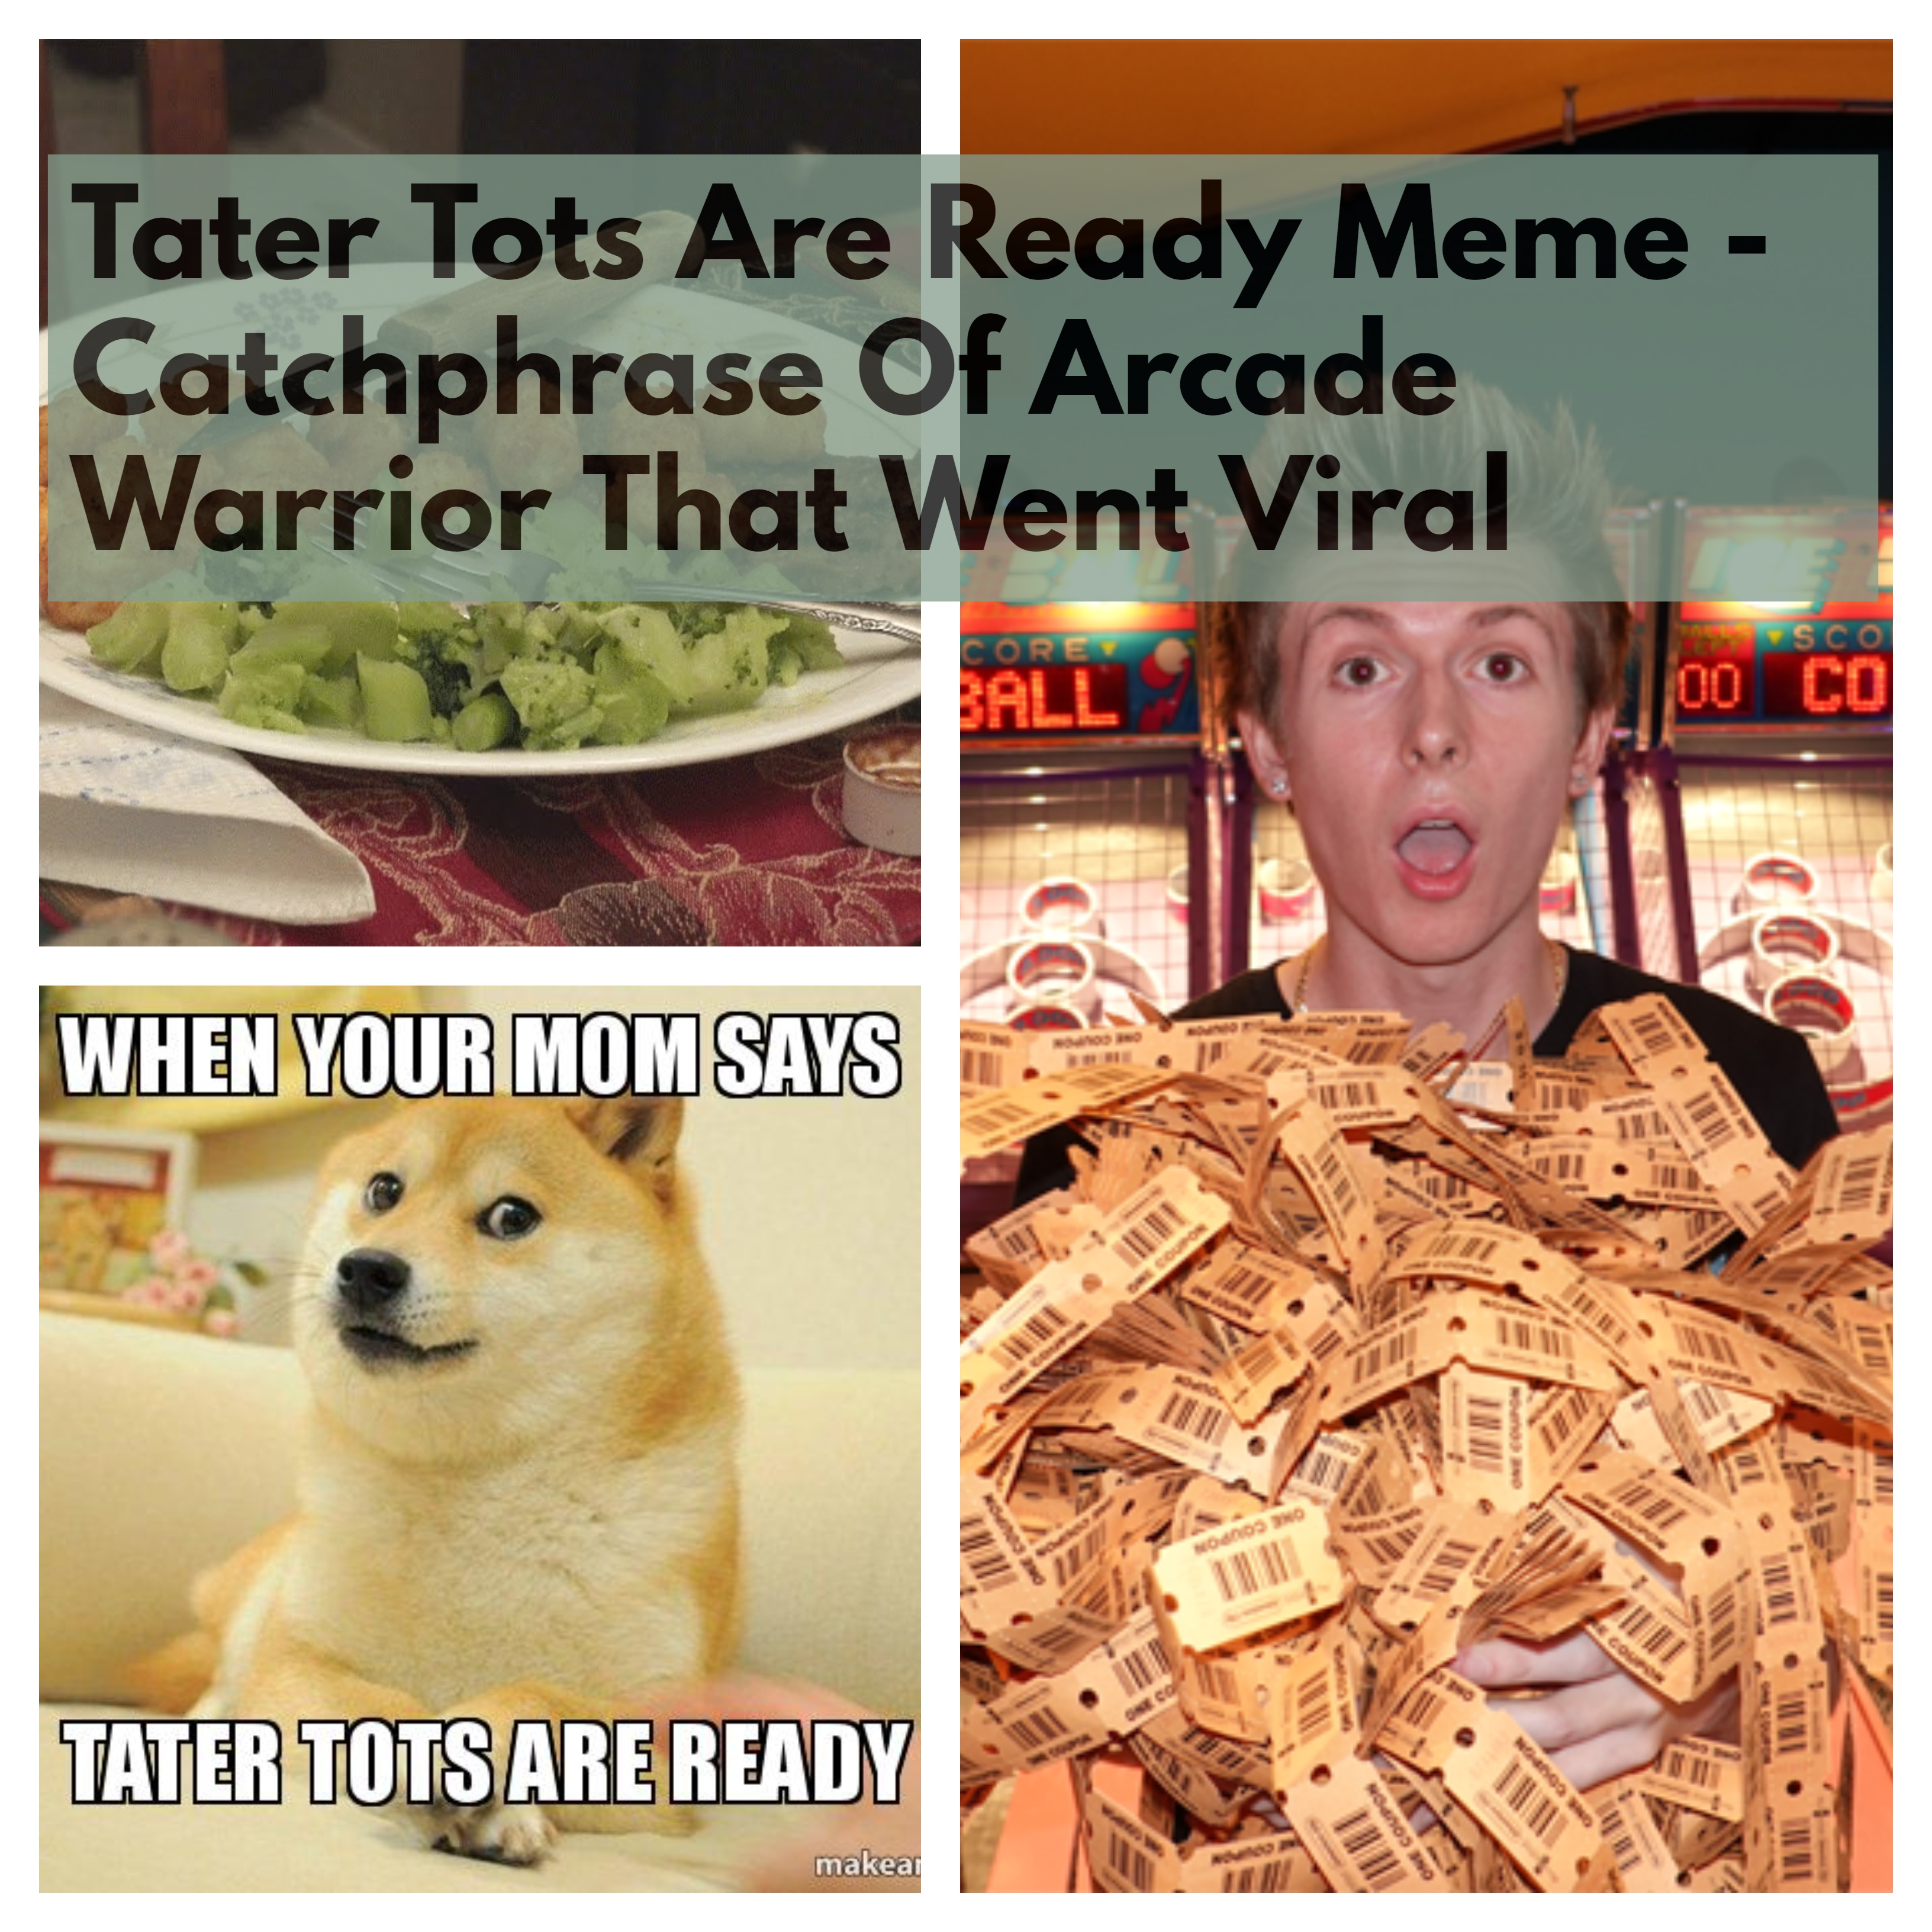 Tater Tots Are Ready Meme - Catchphrase Of Arcade Warrior That Went Viral